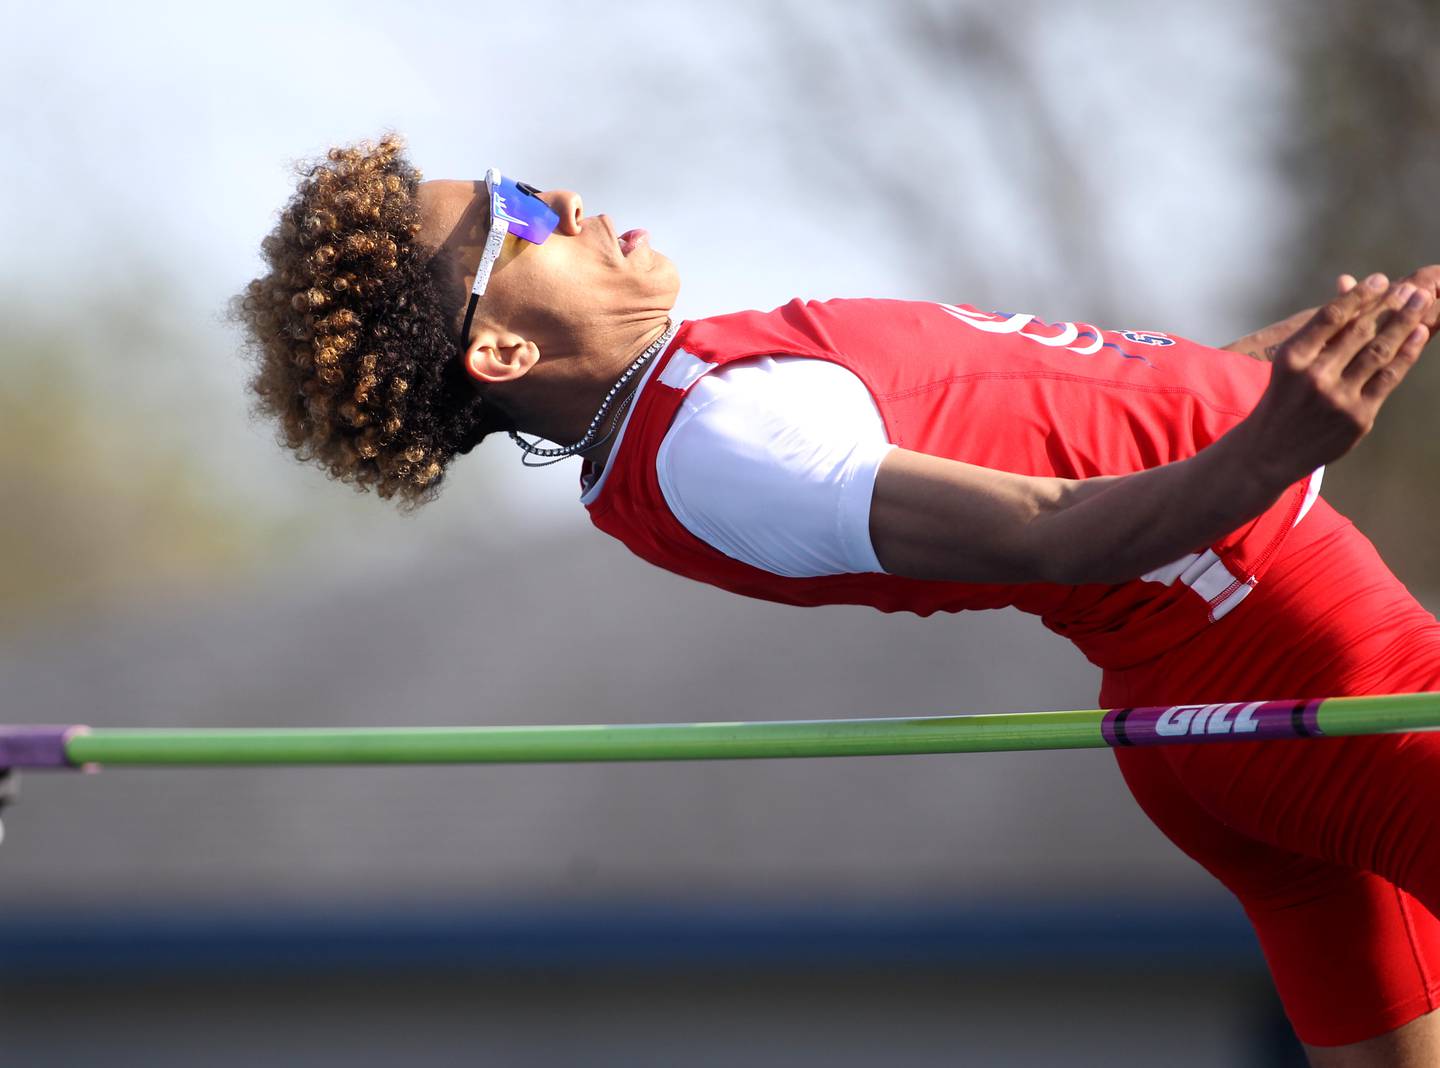 South Elgin’s Jalen Jones clears the bar in the high jump competition during the Kane County Boys Track and Field Invitational at Geneva High School on Monday, May 9, 2022.